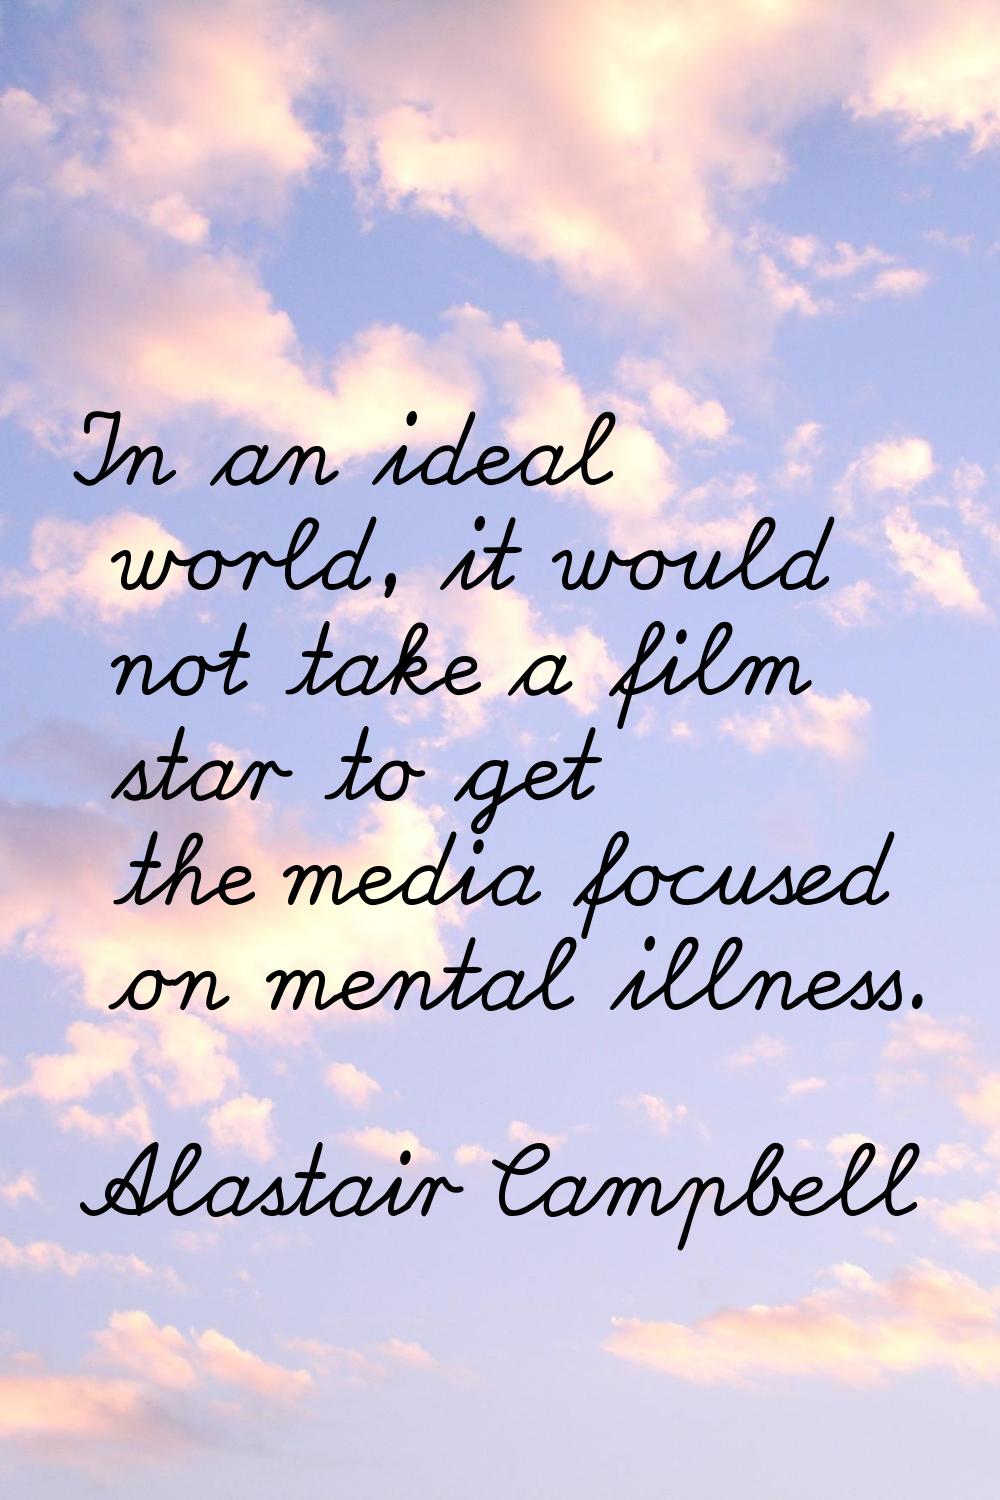 In an ideal world, it would not take a film star to get the media focused on mental illness.